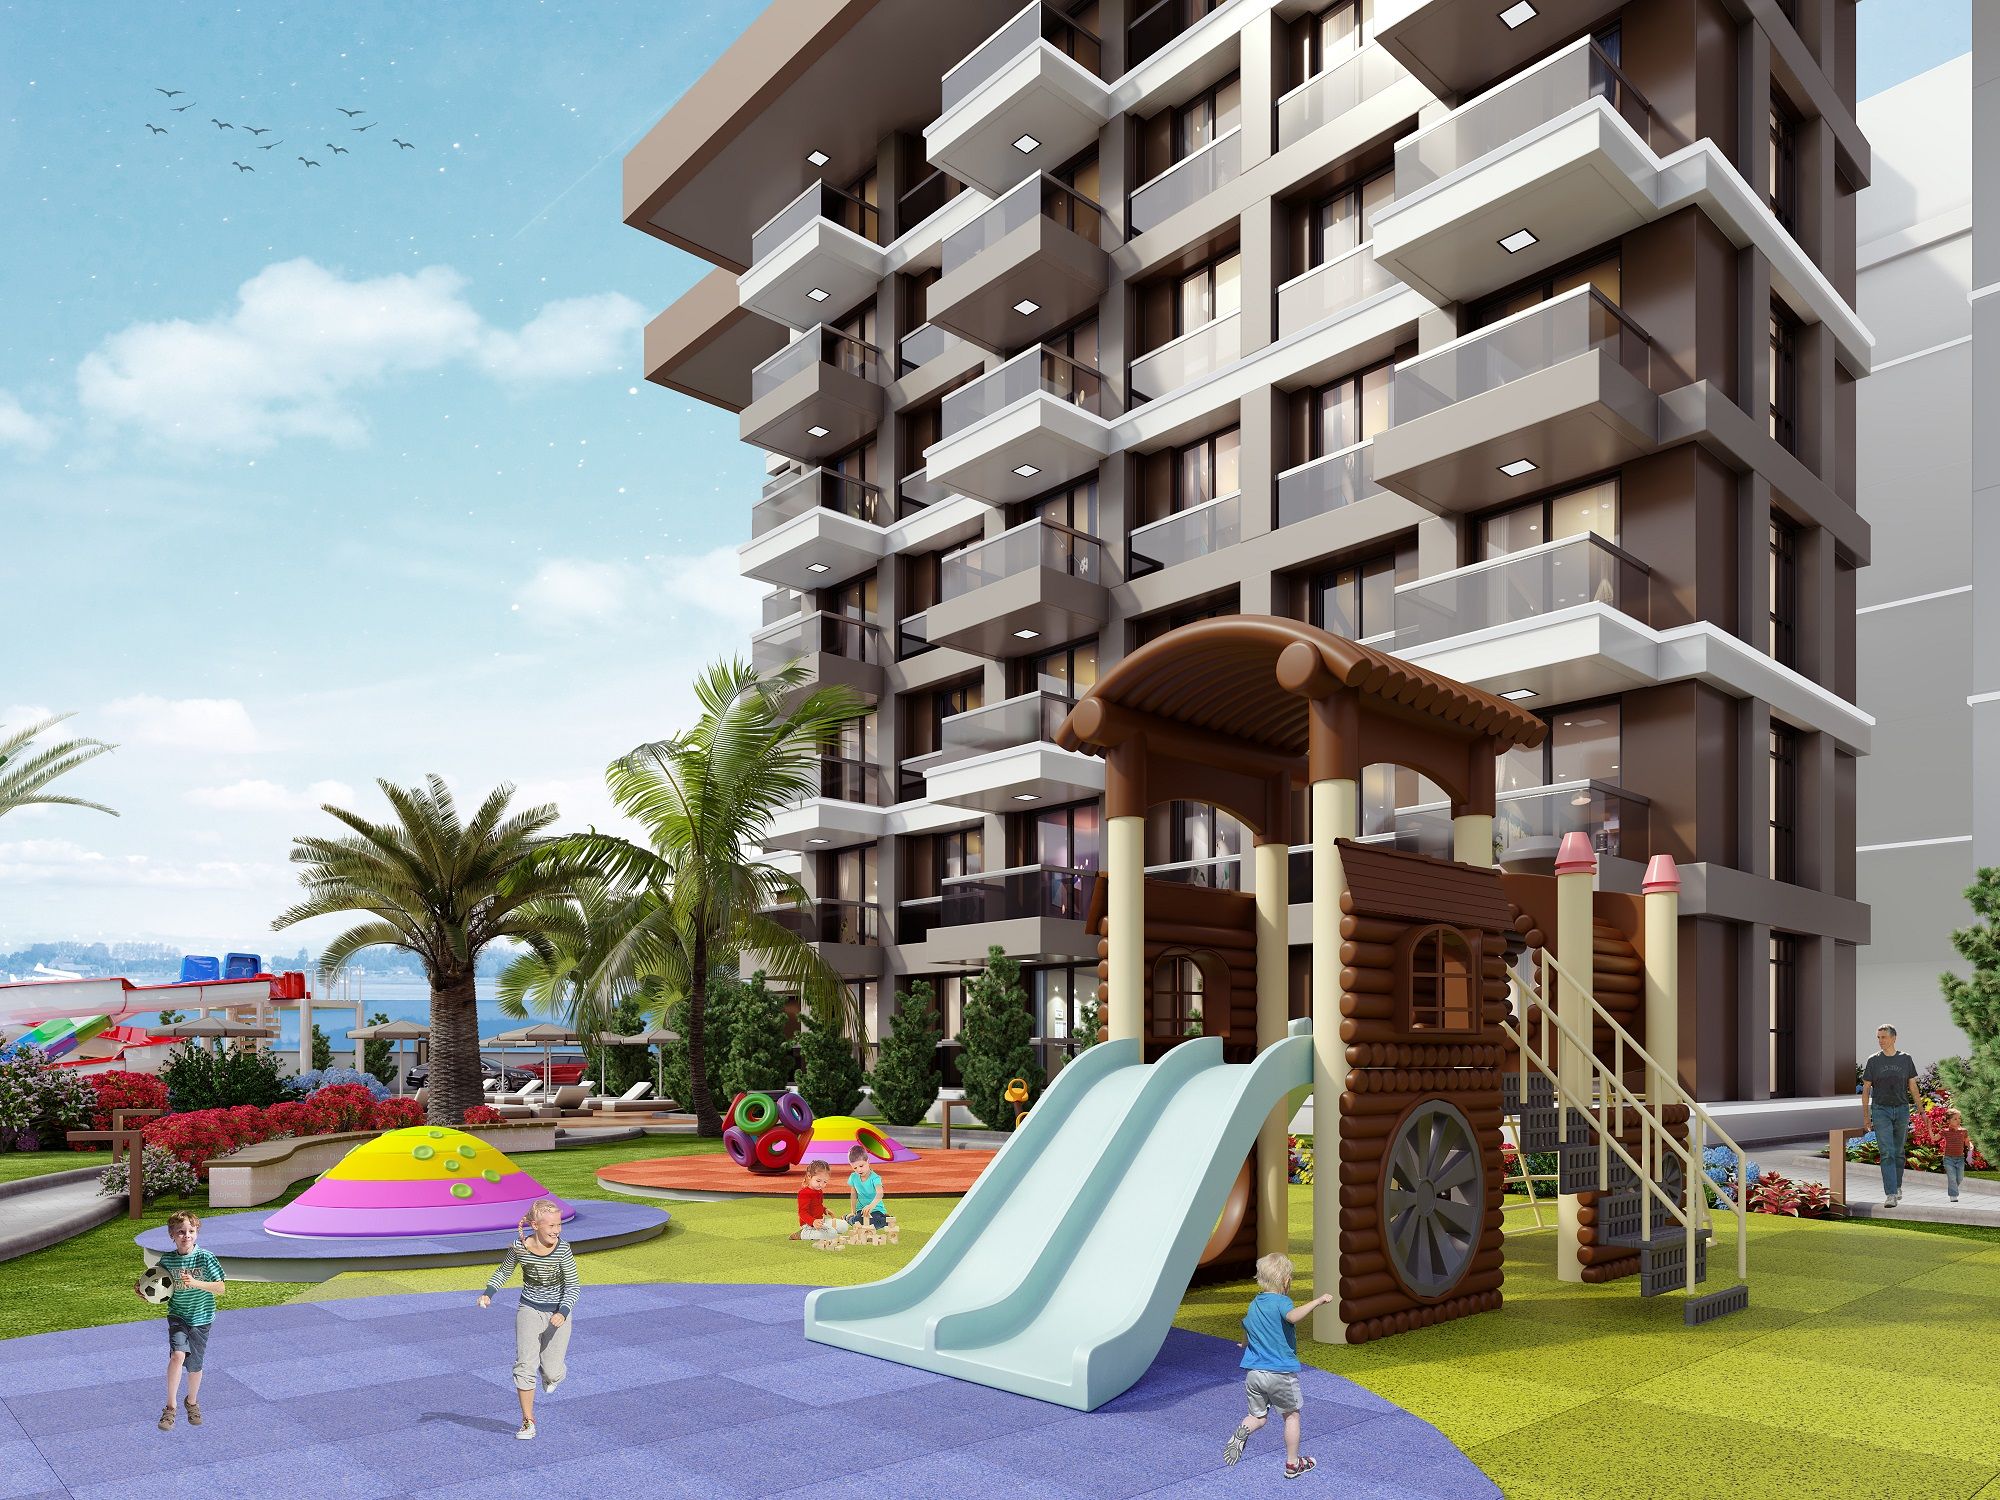 New project with rich infrastructure in Gazipasa city, Alanya